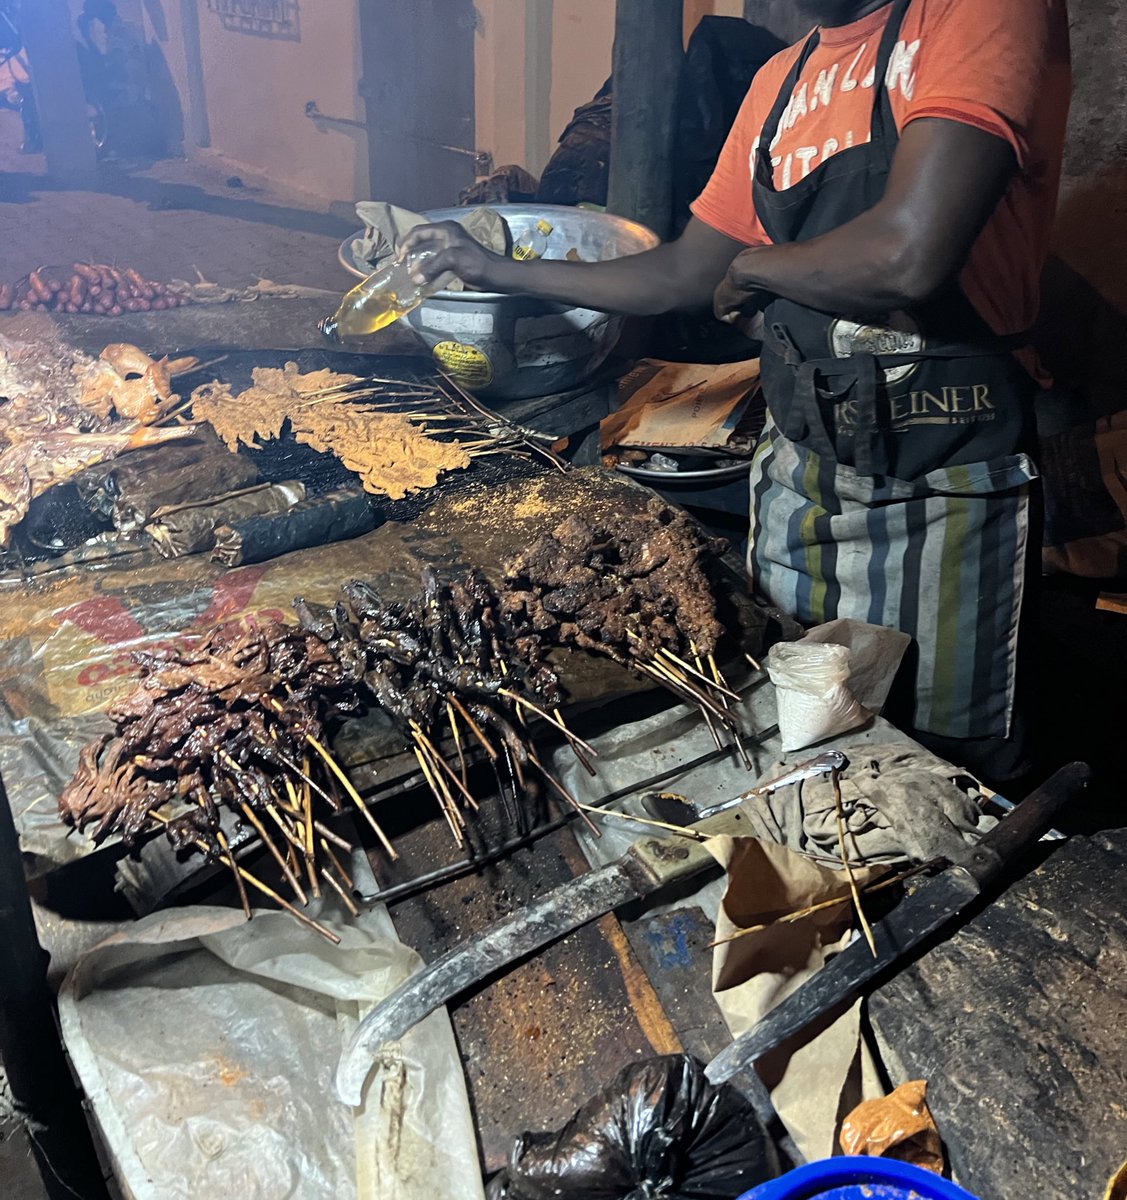 The suya man I met in Lome tonight, from Sokoto State in Nigeria, has been living in Togo since 1991.